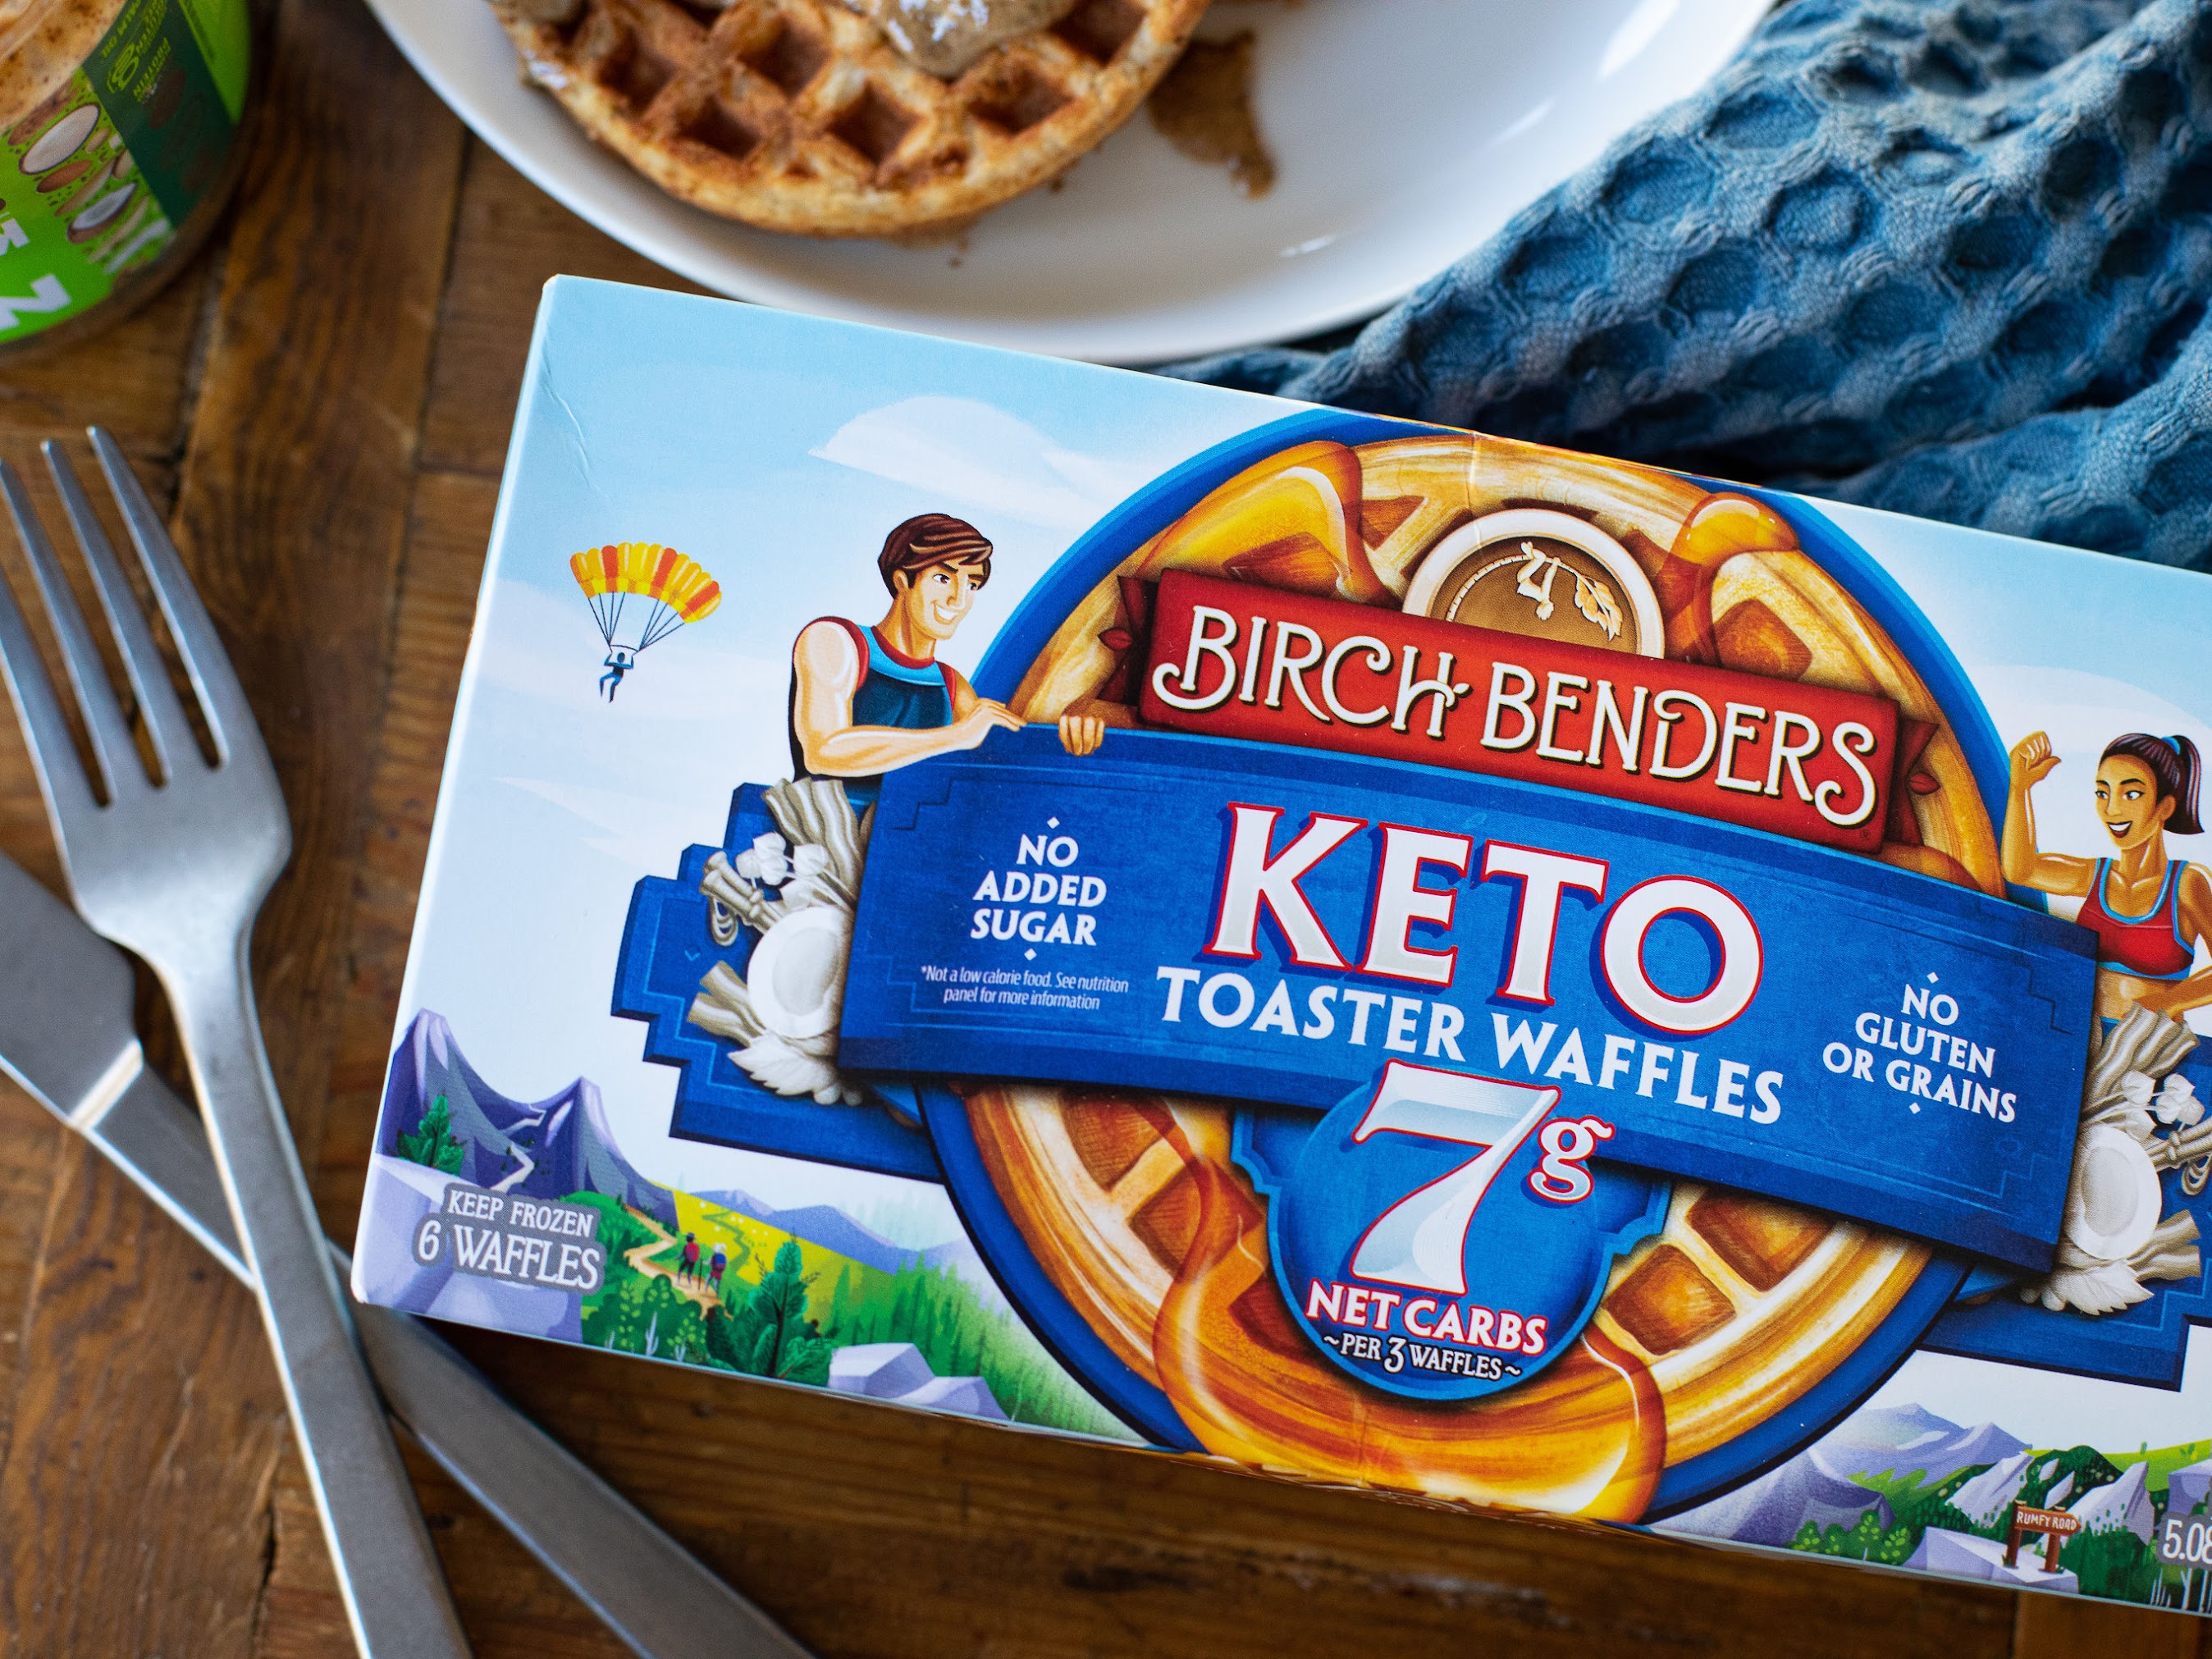 Birch Benders Waffles As Low as $1.30 At Publix